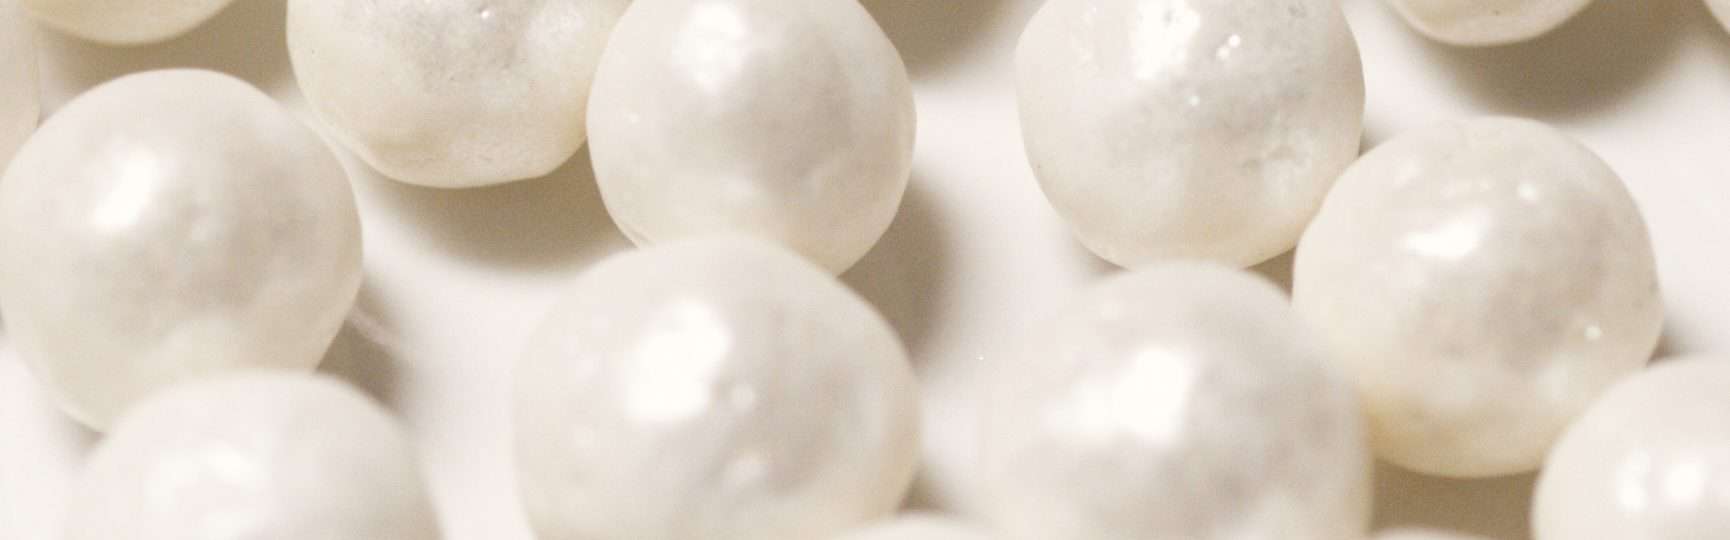 White cultured pearls